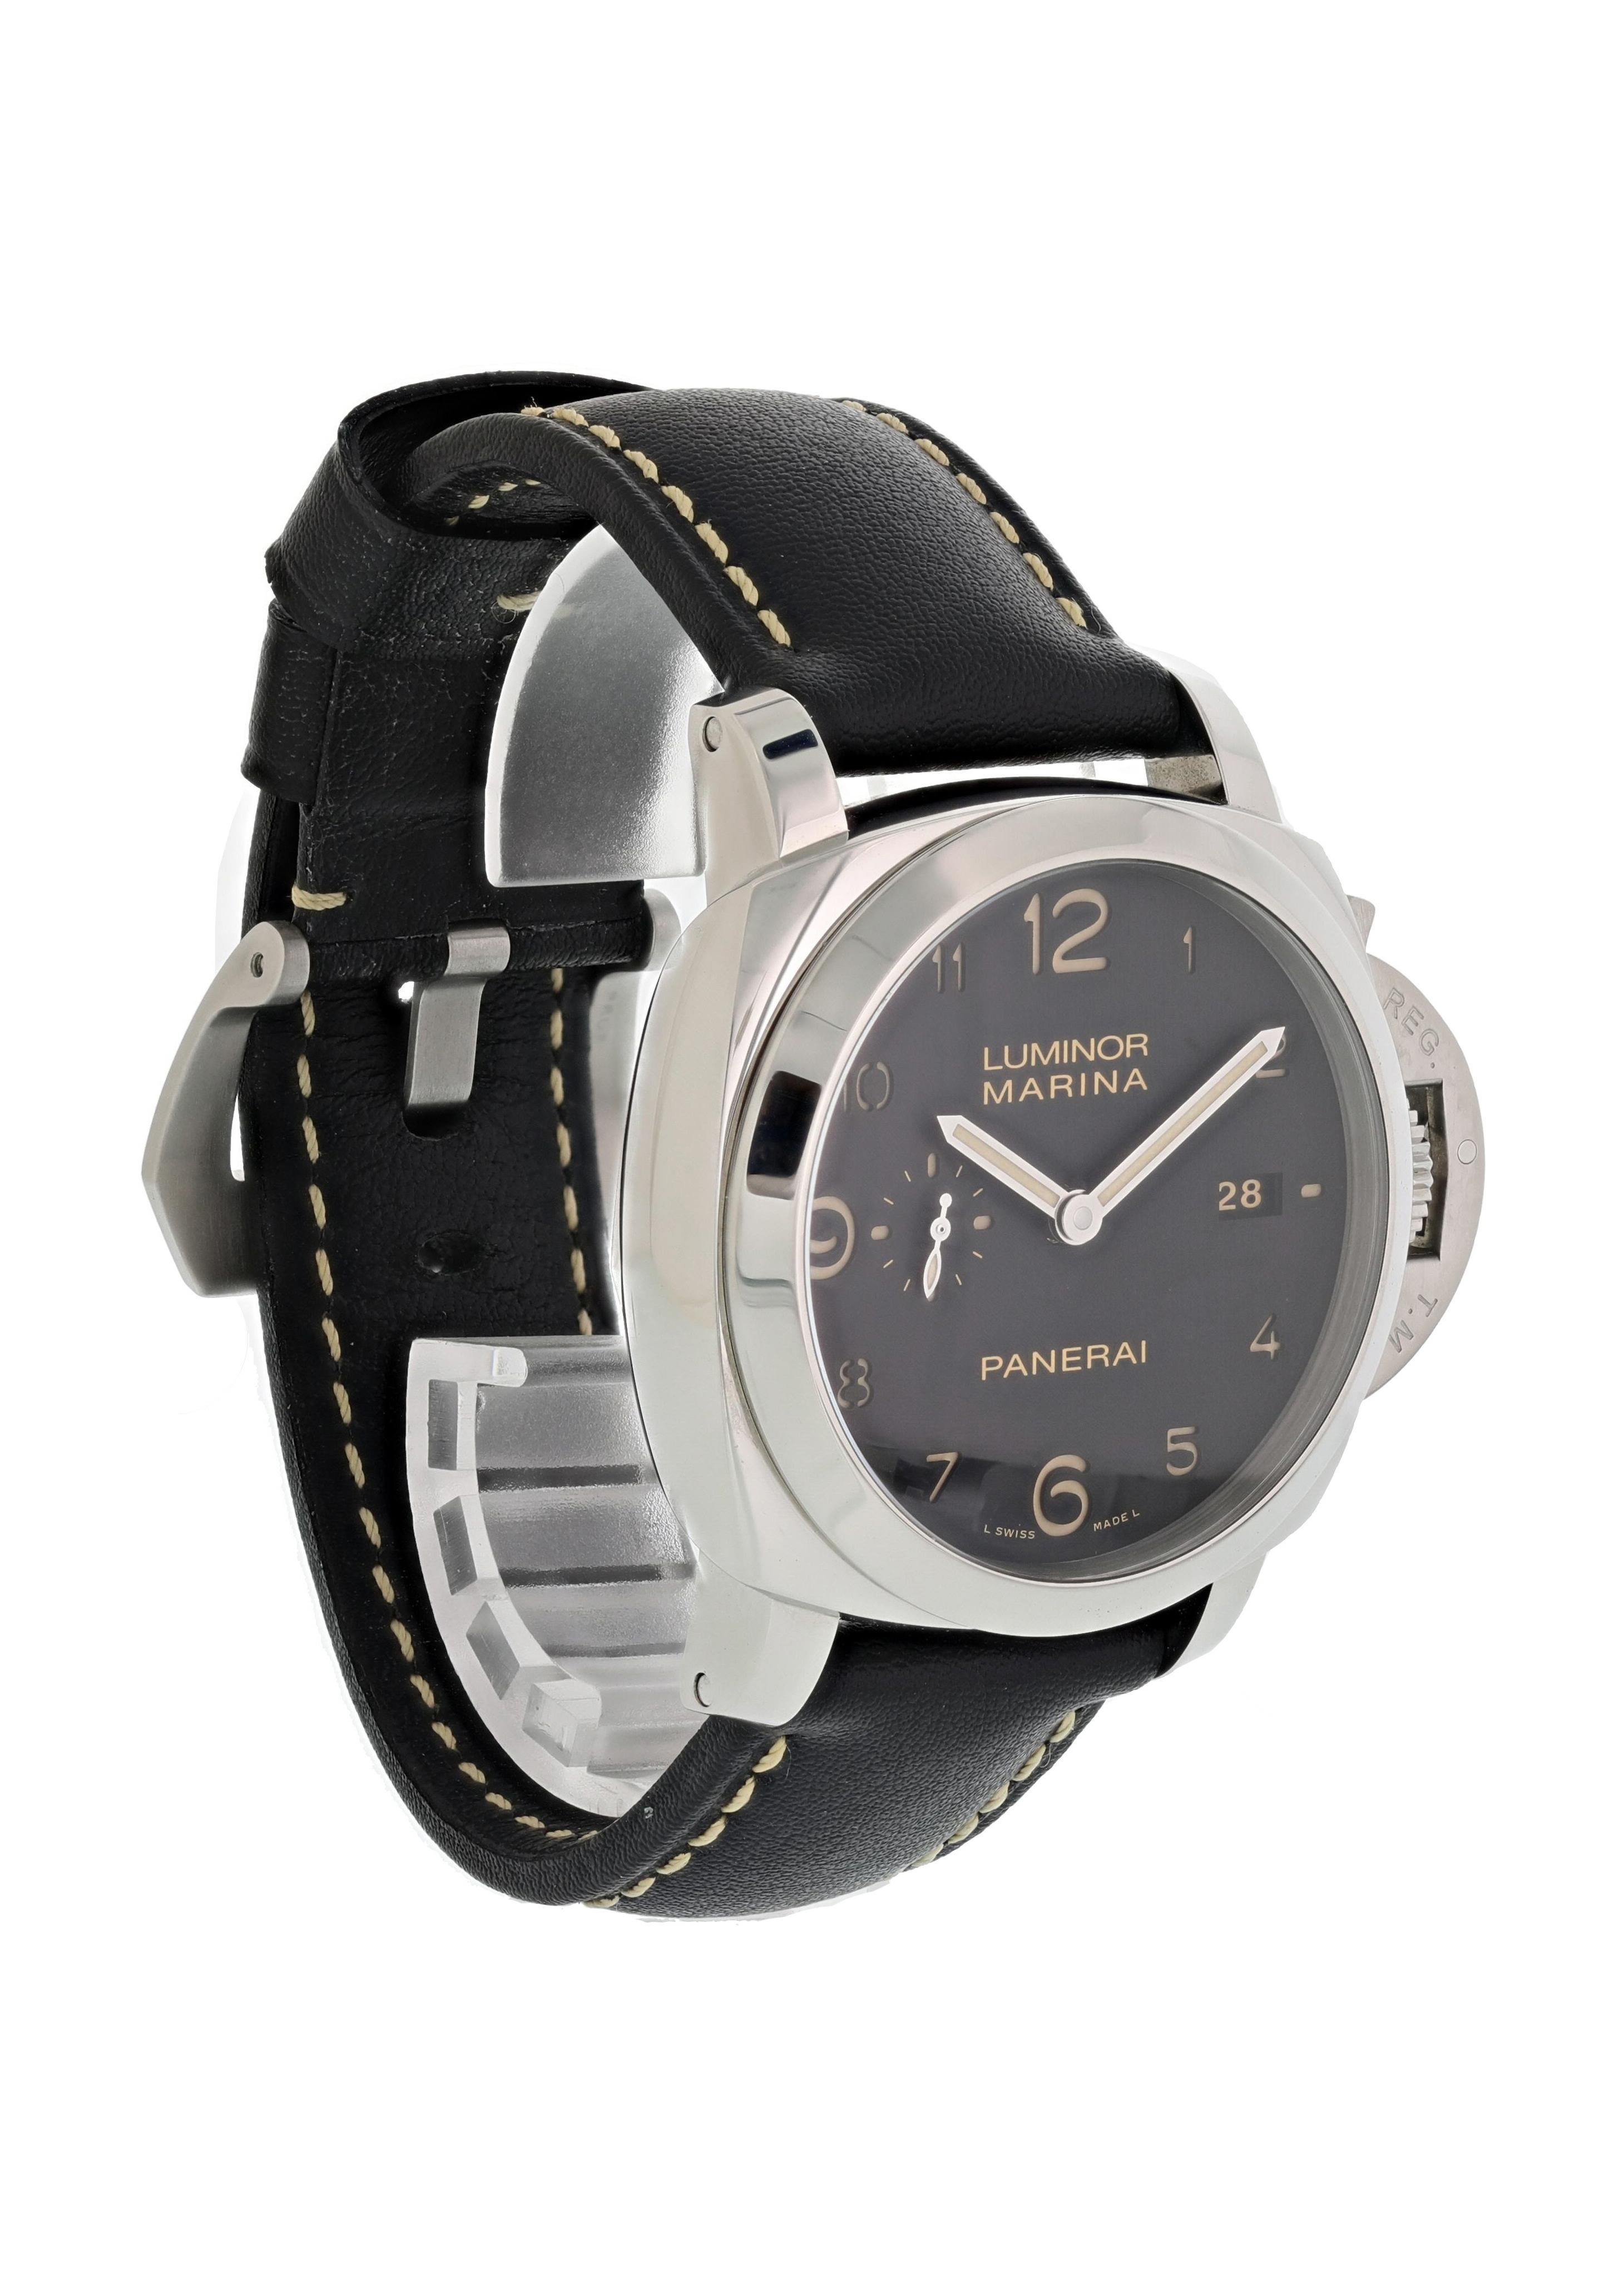 Panerai Luminor Marina 3 Day PAM00359 Mens Watch. 44mm stainless steel with smooth bezel. Black sandwich dial with date display and luminous hands and Arabic numeral hour markers. Black leather strap with a stainless steel buckle. Calibre P.9000